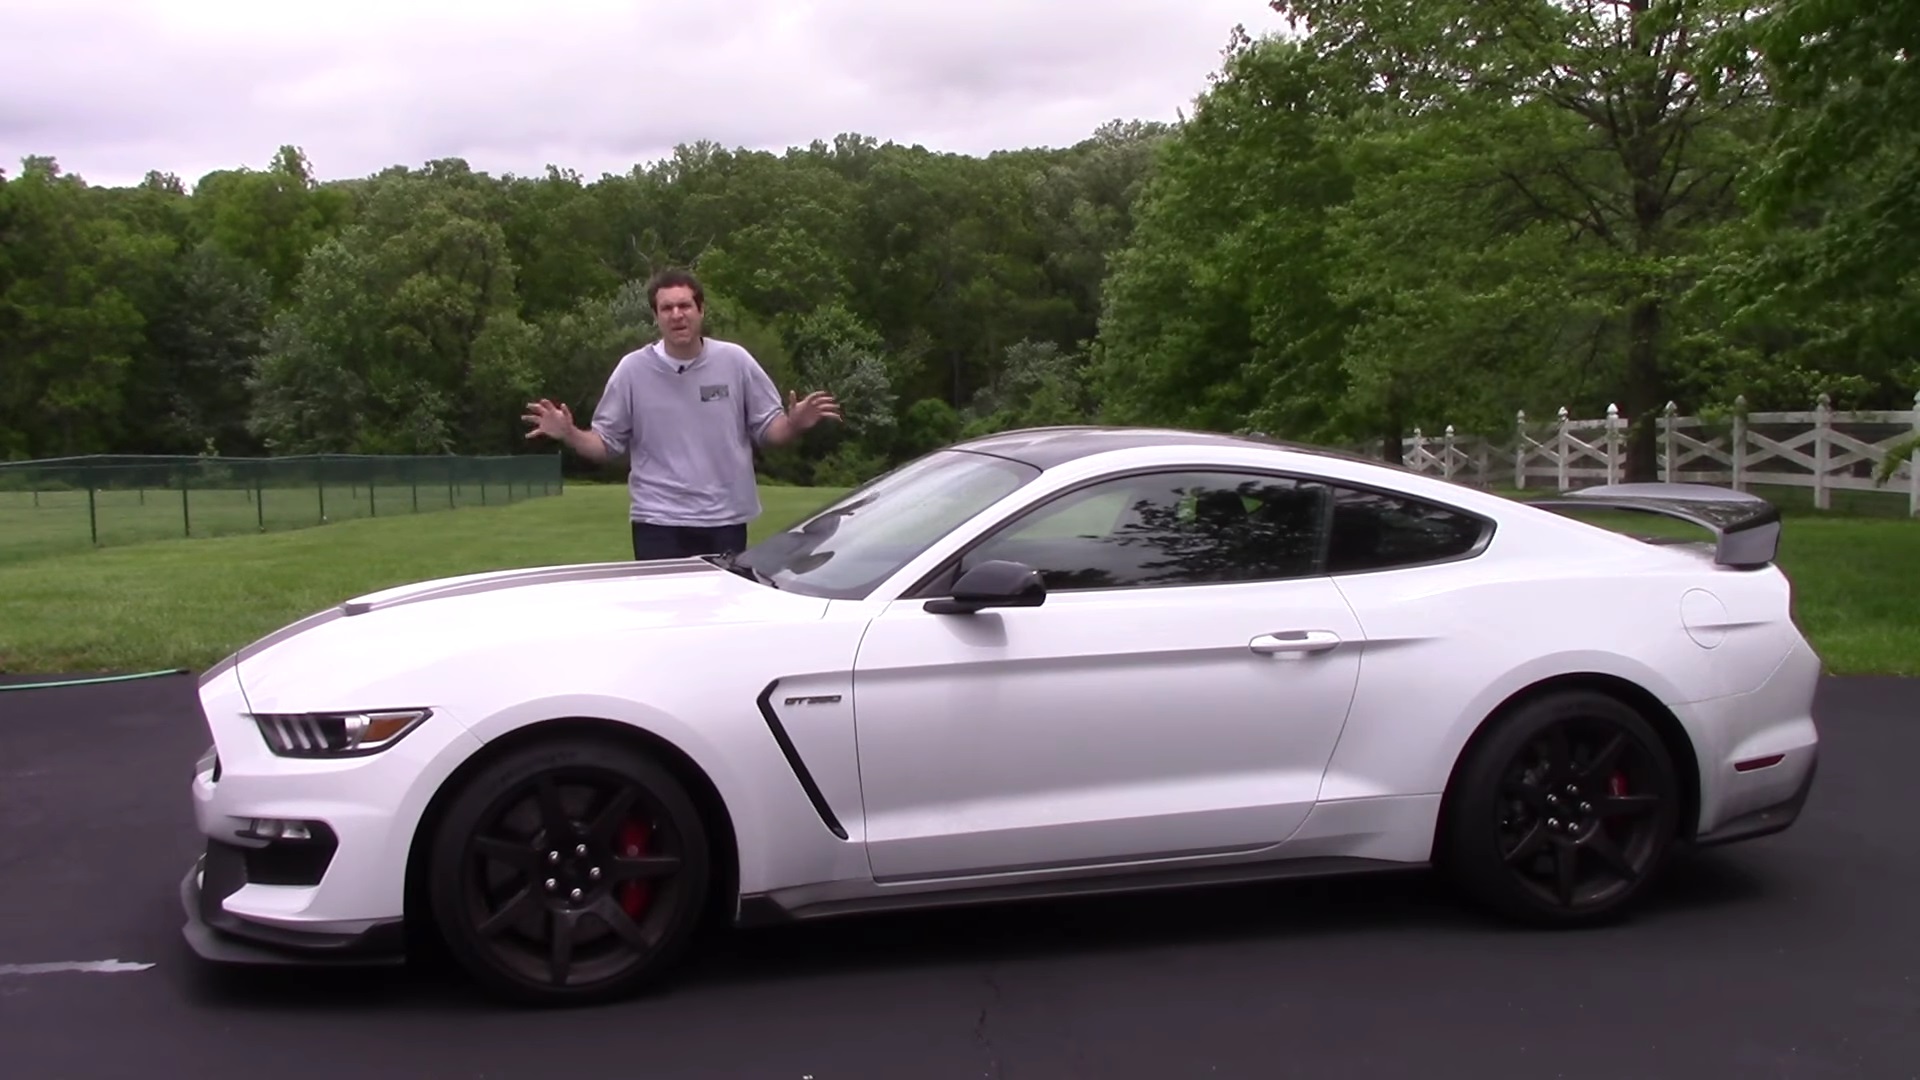 Video: 2017 Ford Mustang Shelby GT350R - The Ultimate Ford Mustang?